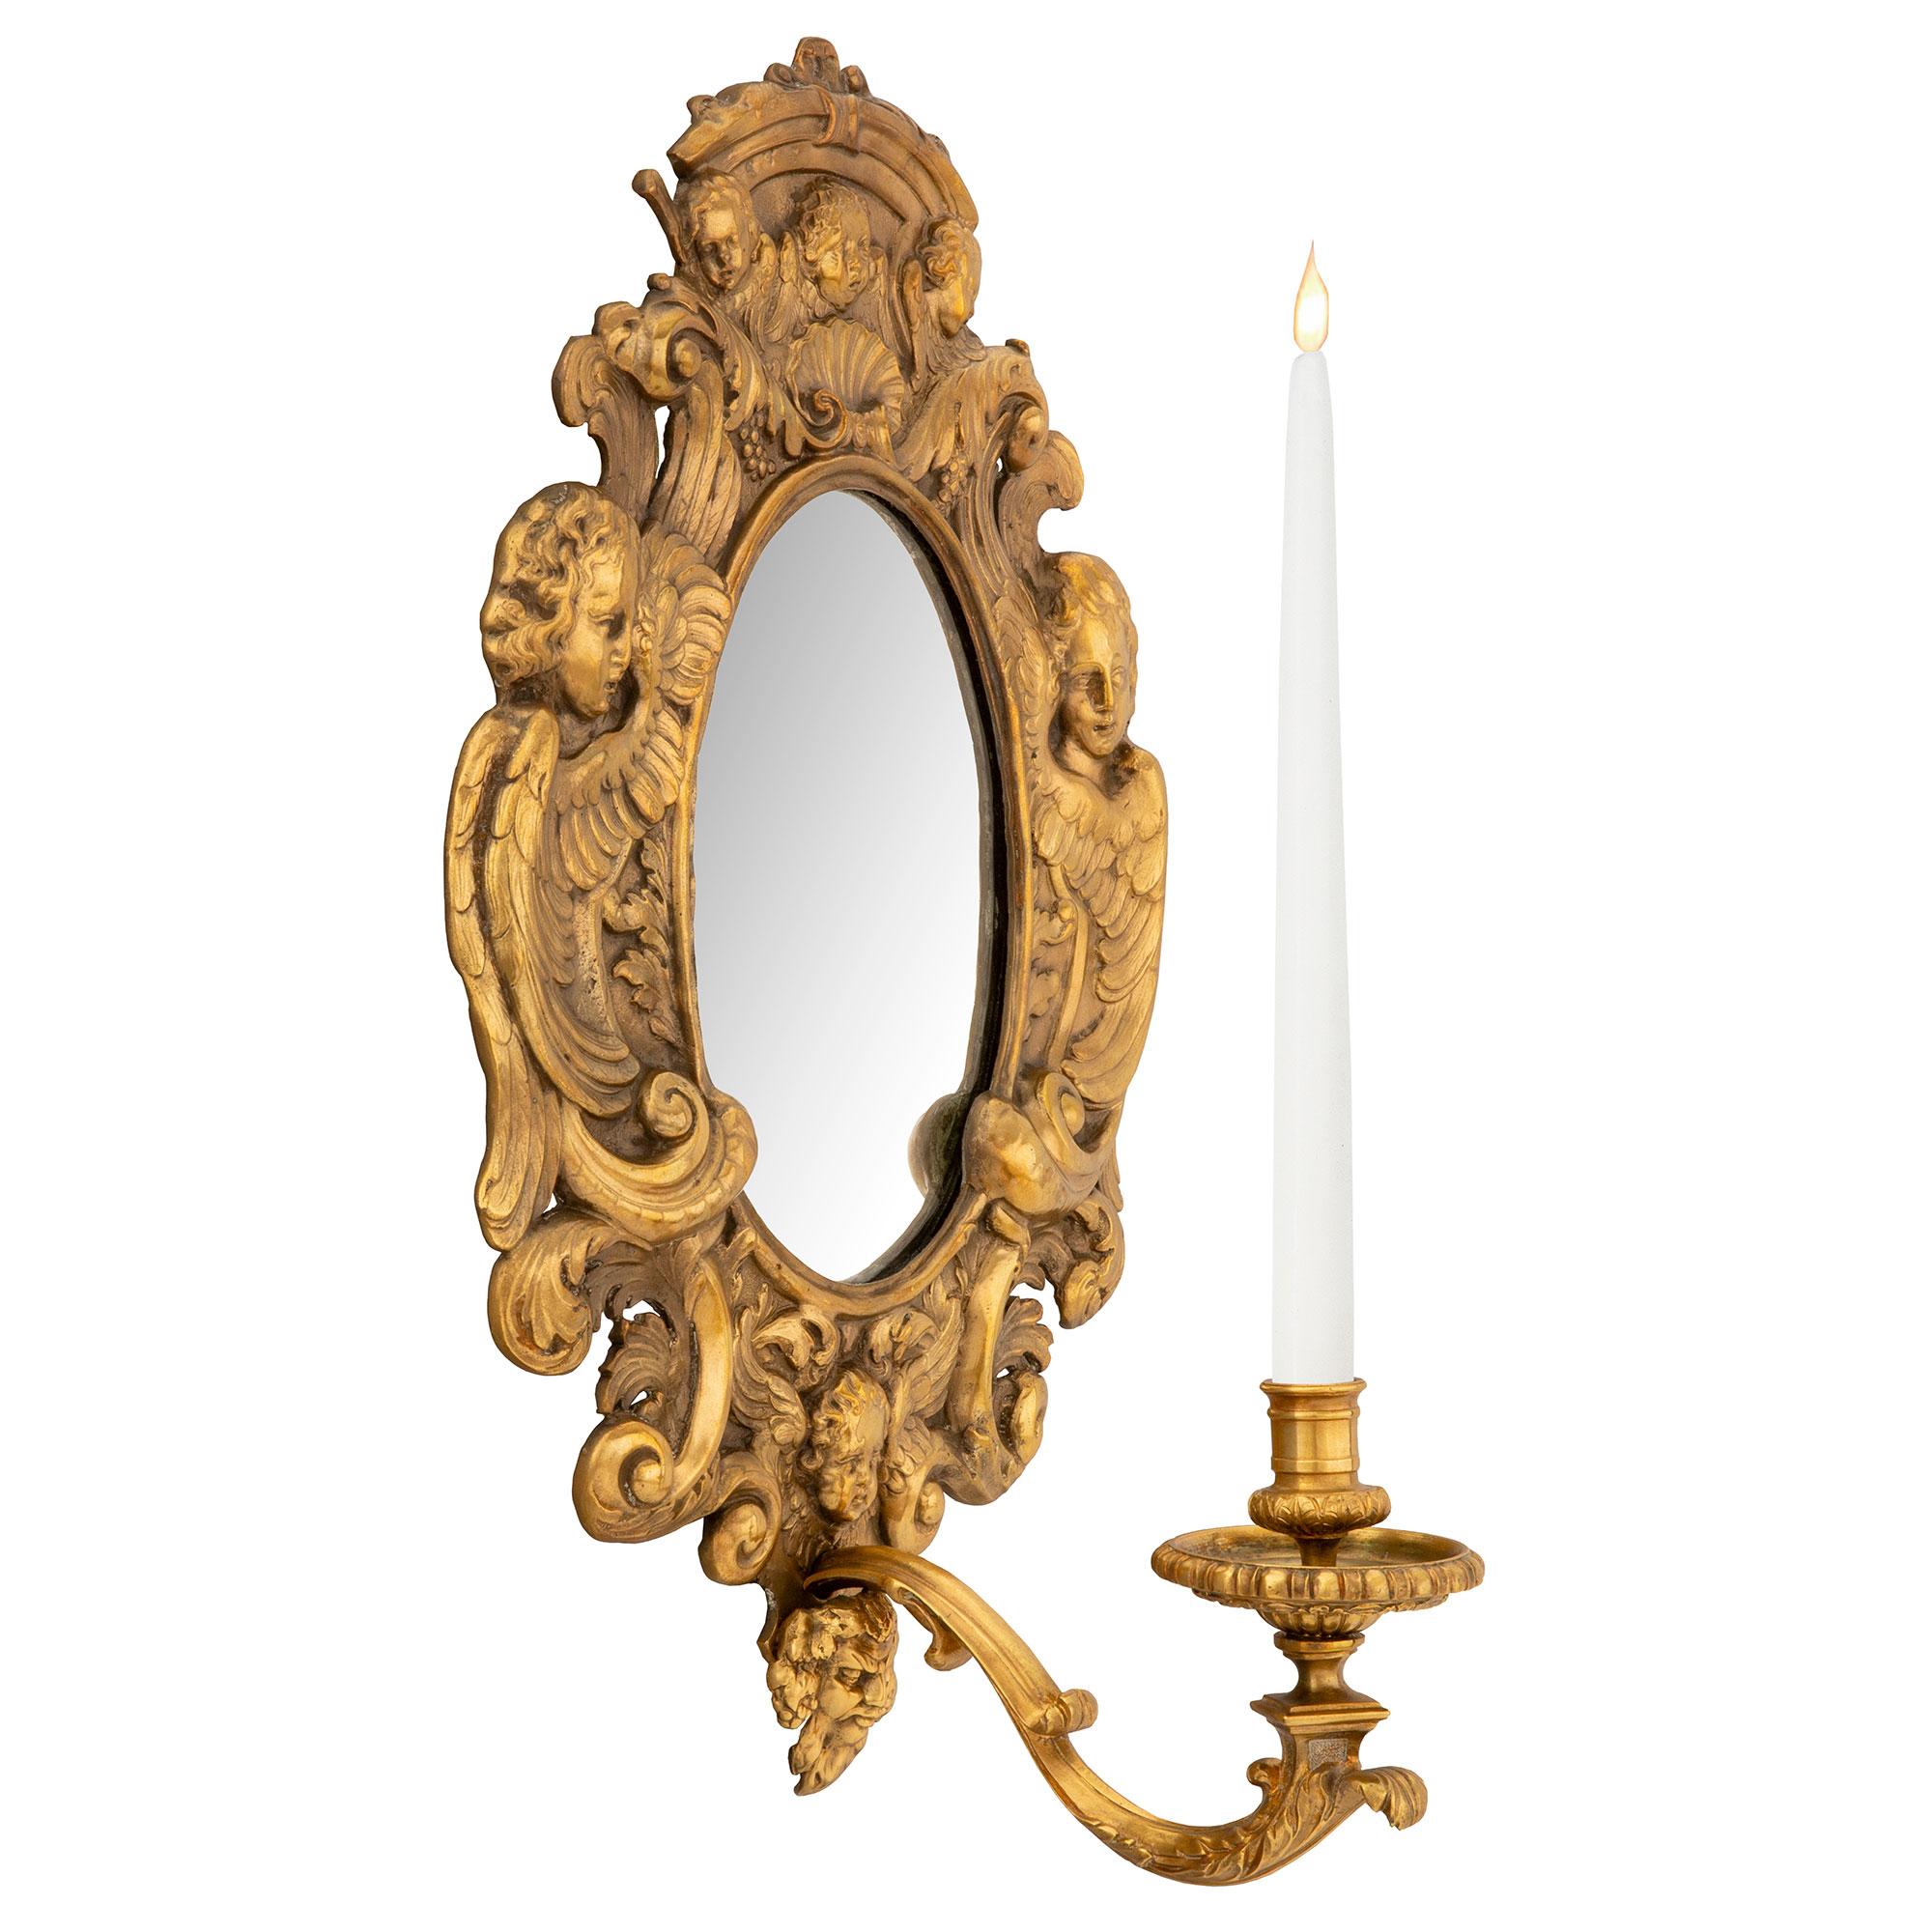 An elegant pair of French 19th century Baroque st. ormolu mirrored sconces. Each sconce is centered by a single finely scrolled arm adorned with a large acanthus leaf leading to the reeded candle cup. At the bases are richly chased bearded satyrs